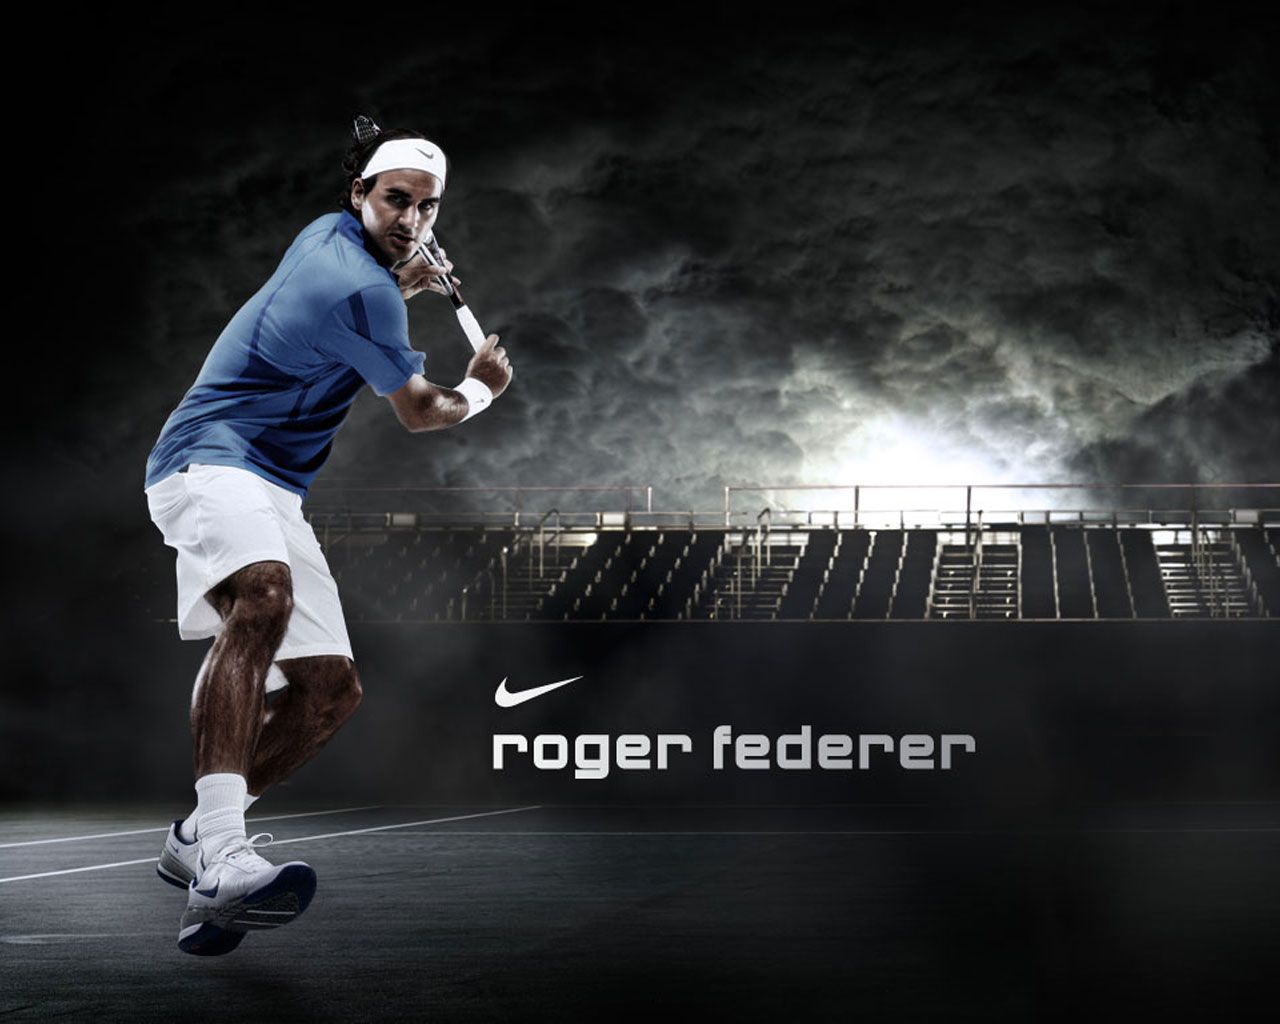 Sports Wallpapers HD: Tennis Wallpapers HD